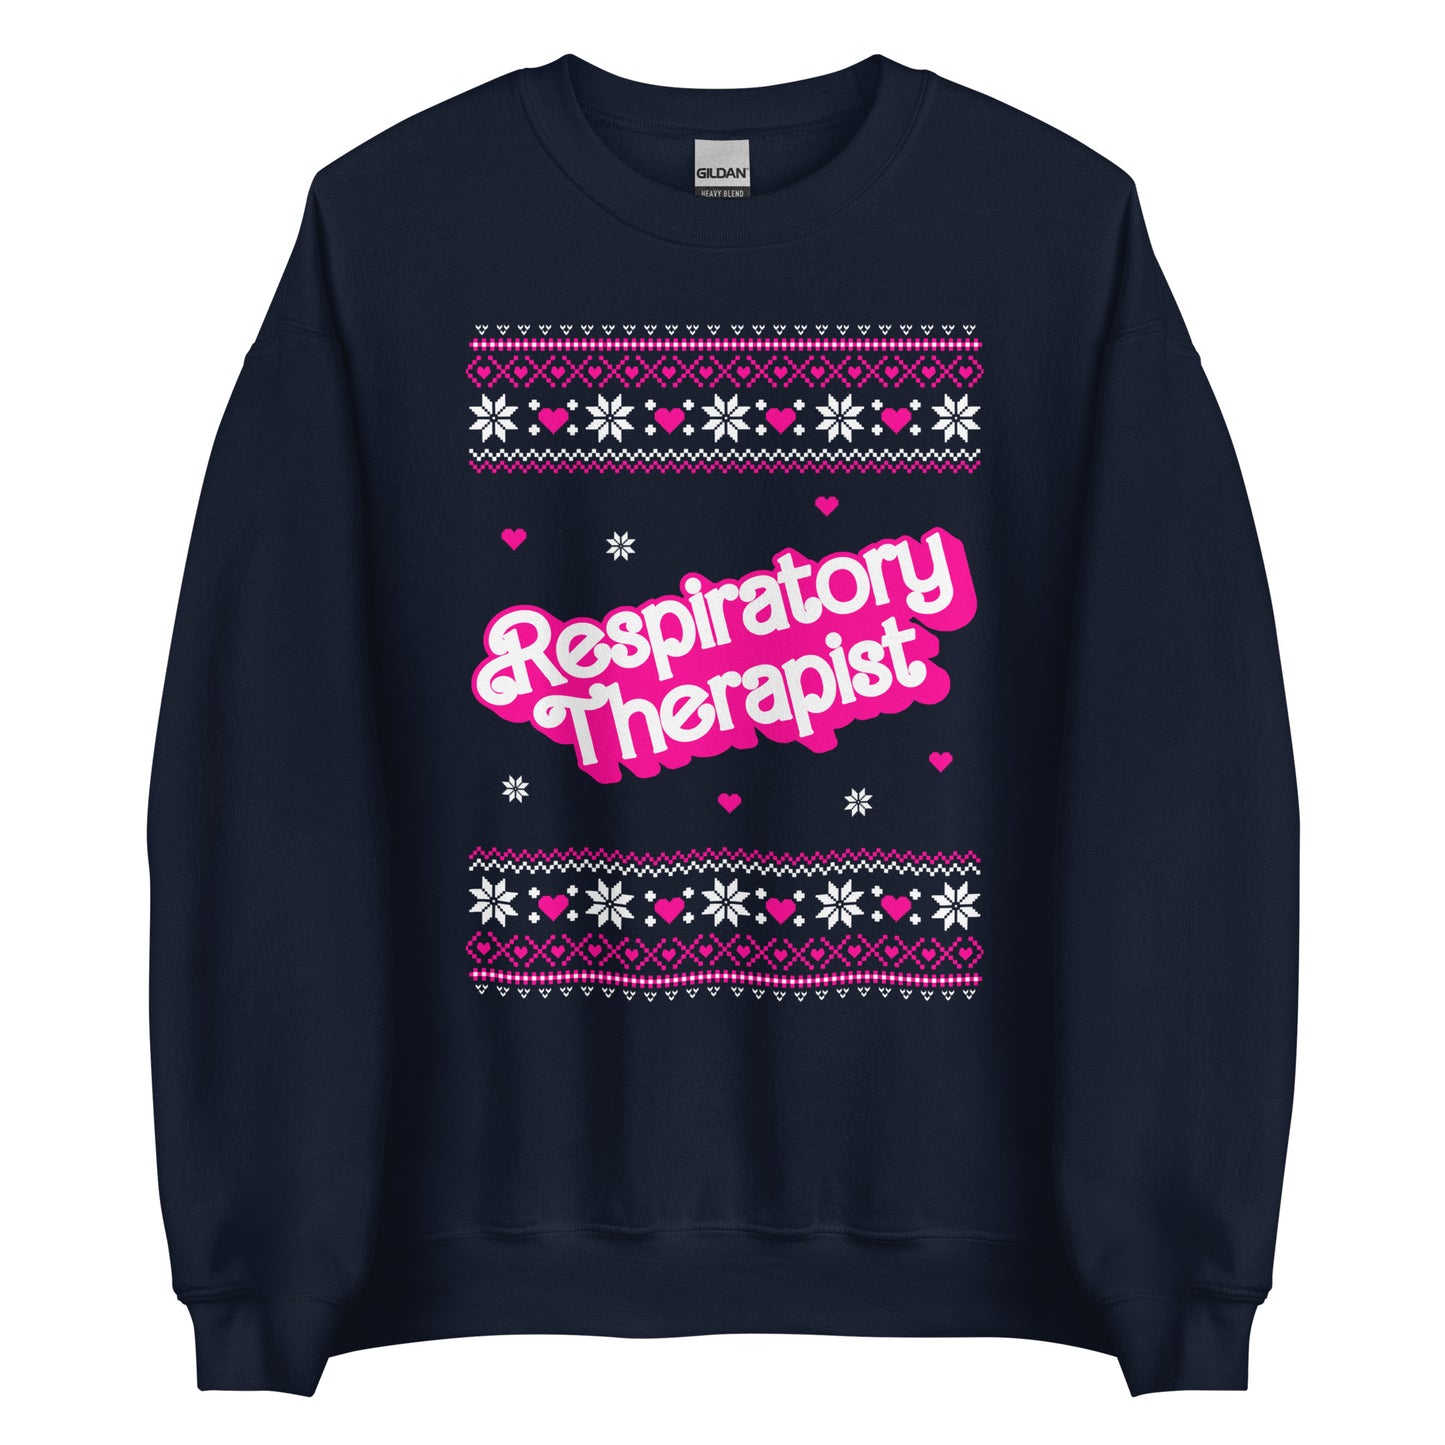 Barbie Respiratory Therapist Ugly Christmas Sweater